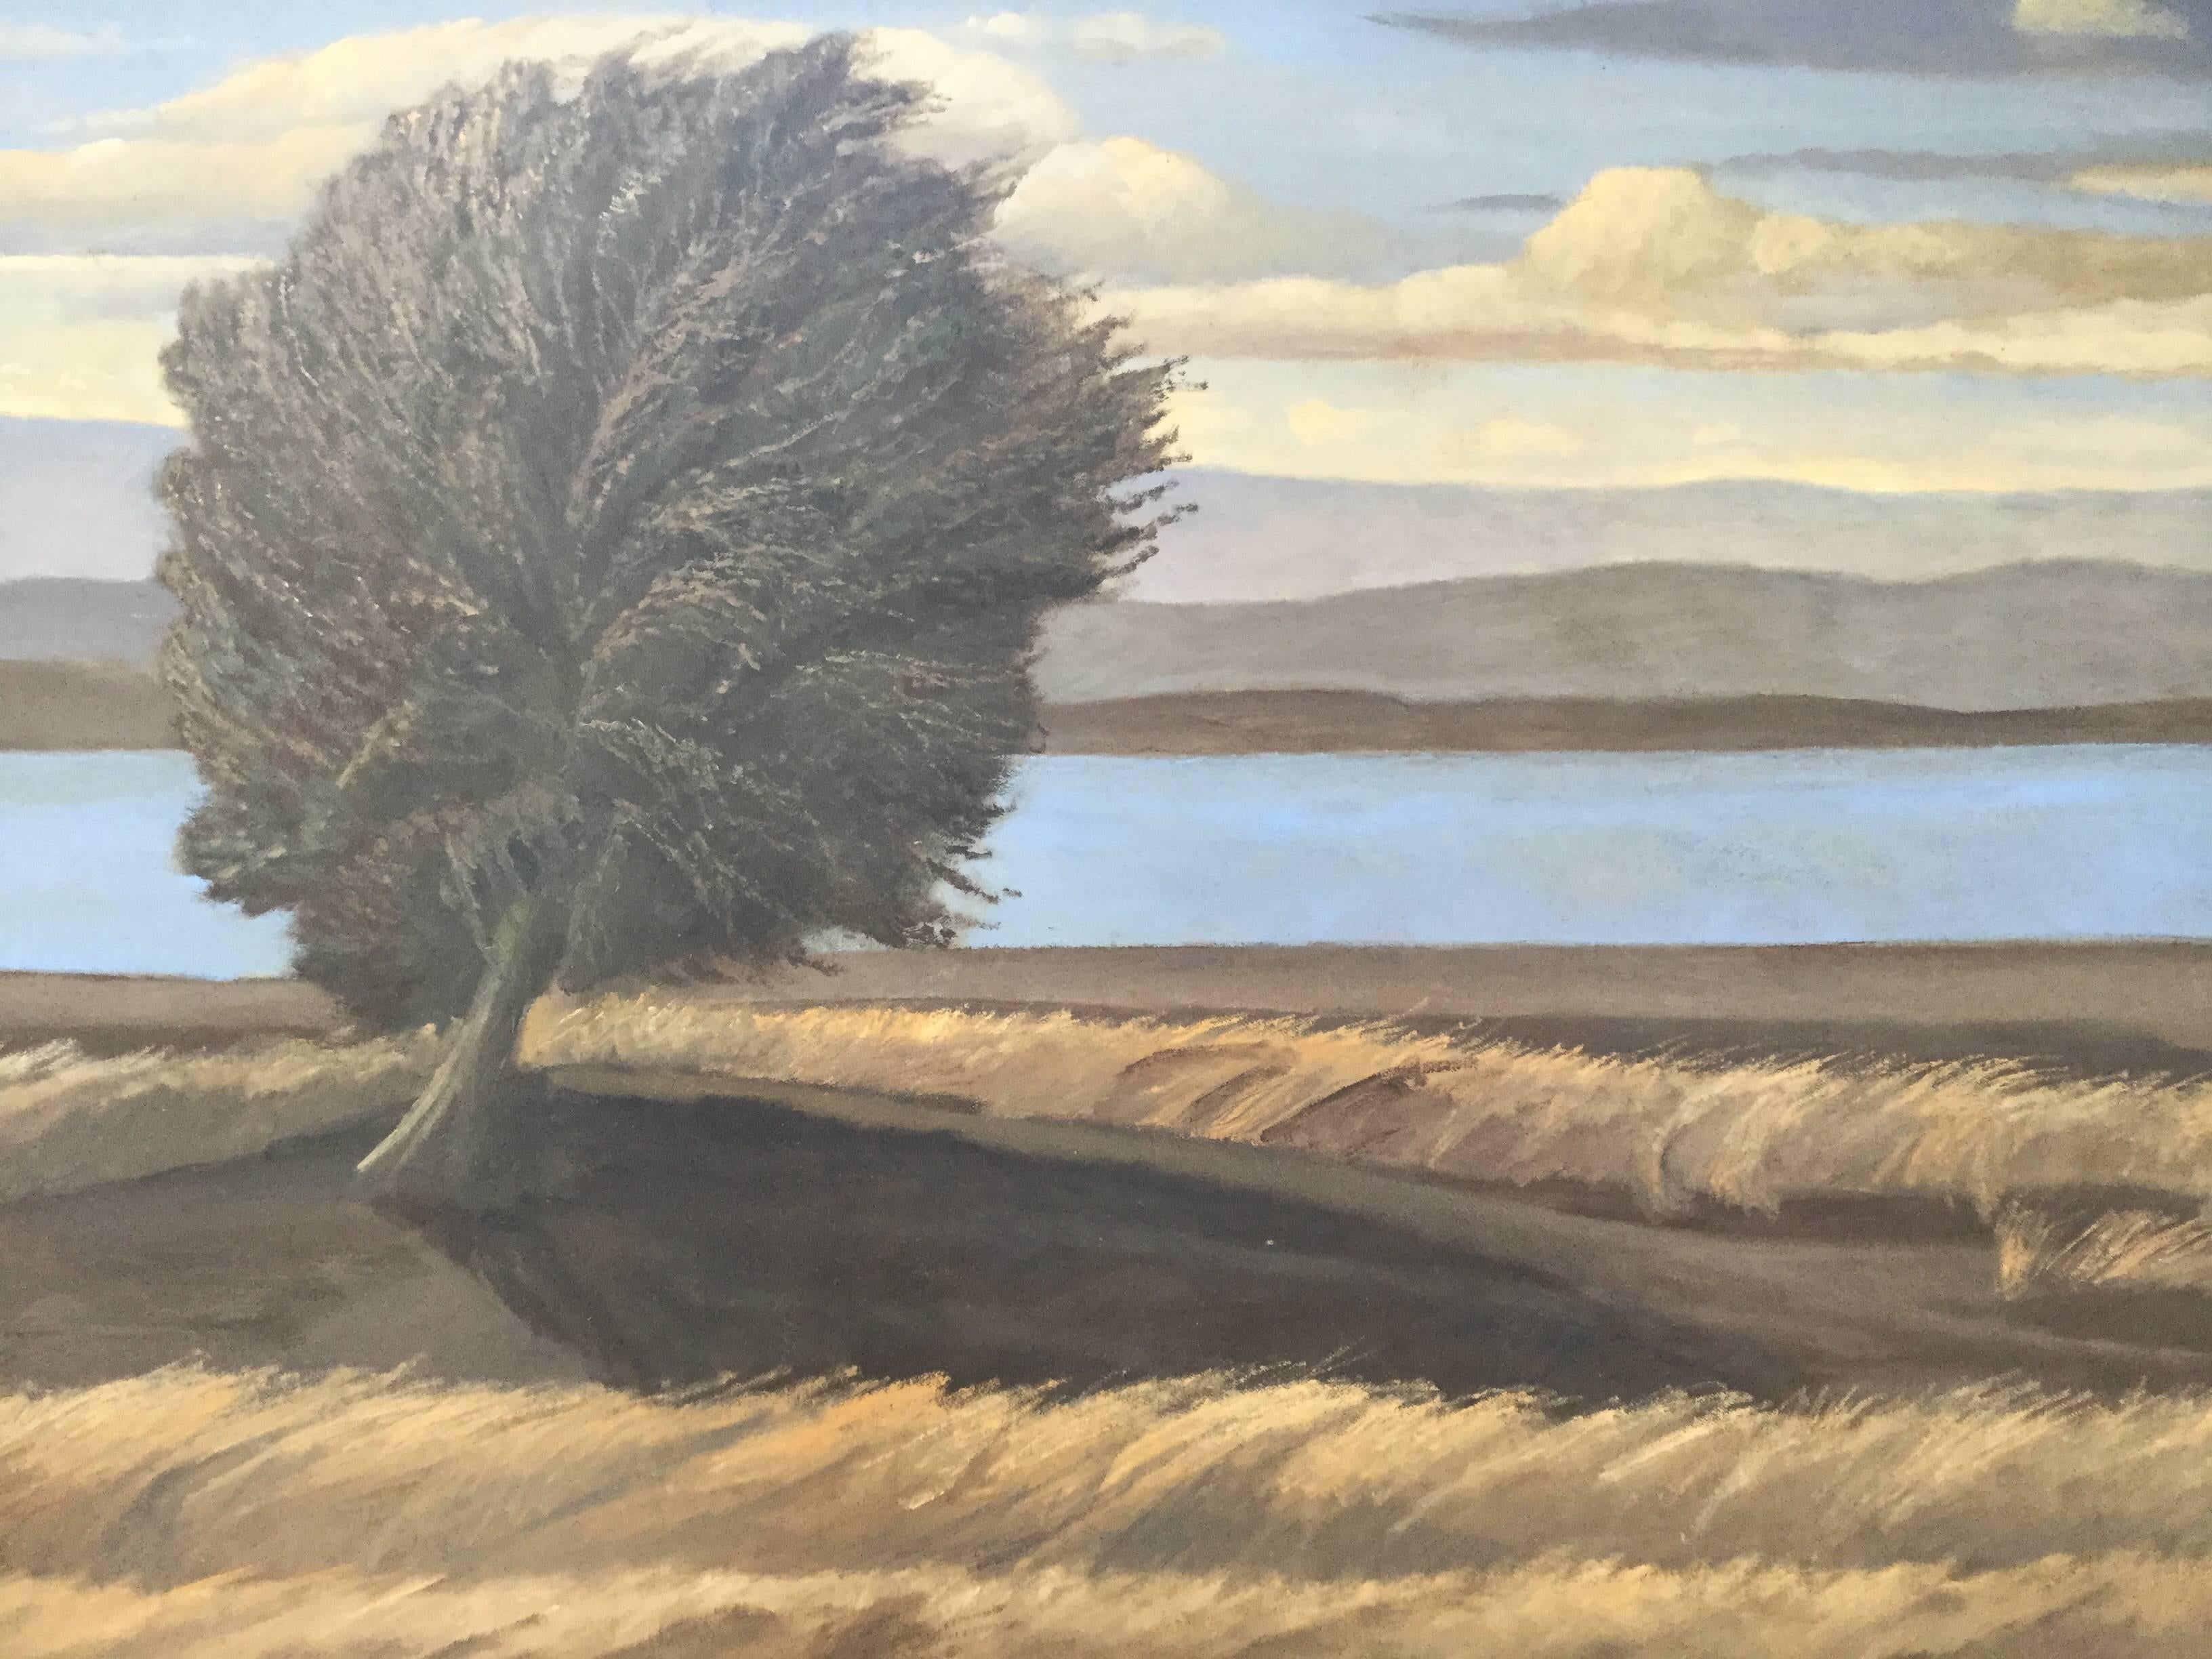 Desert landscape painting with tree blowing in the hot wind and reservoir in the background. Water in the desert gives a coolness with the gray green of the desert tree. A great sense of stillness amid high winds. Beautiful idea and execution.